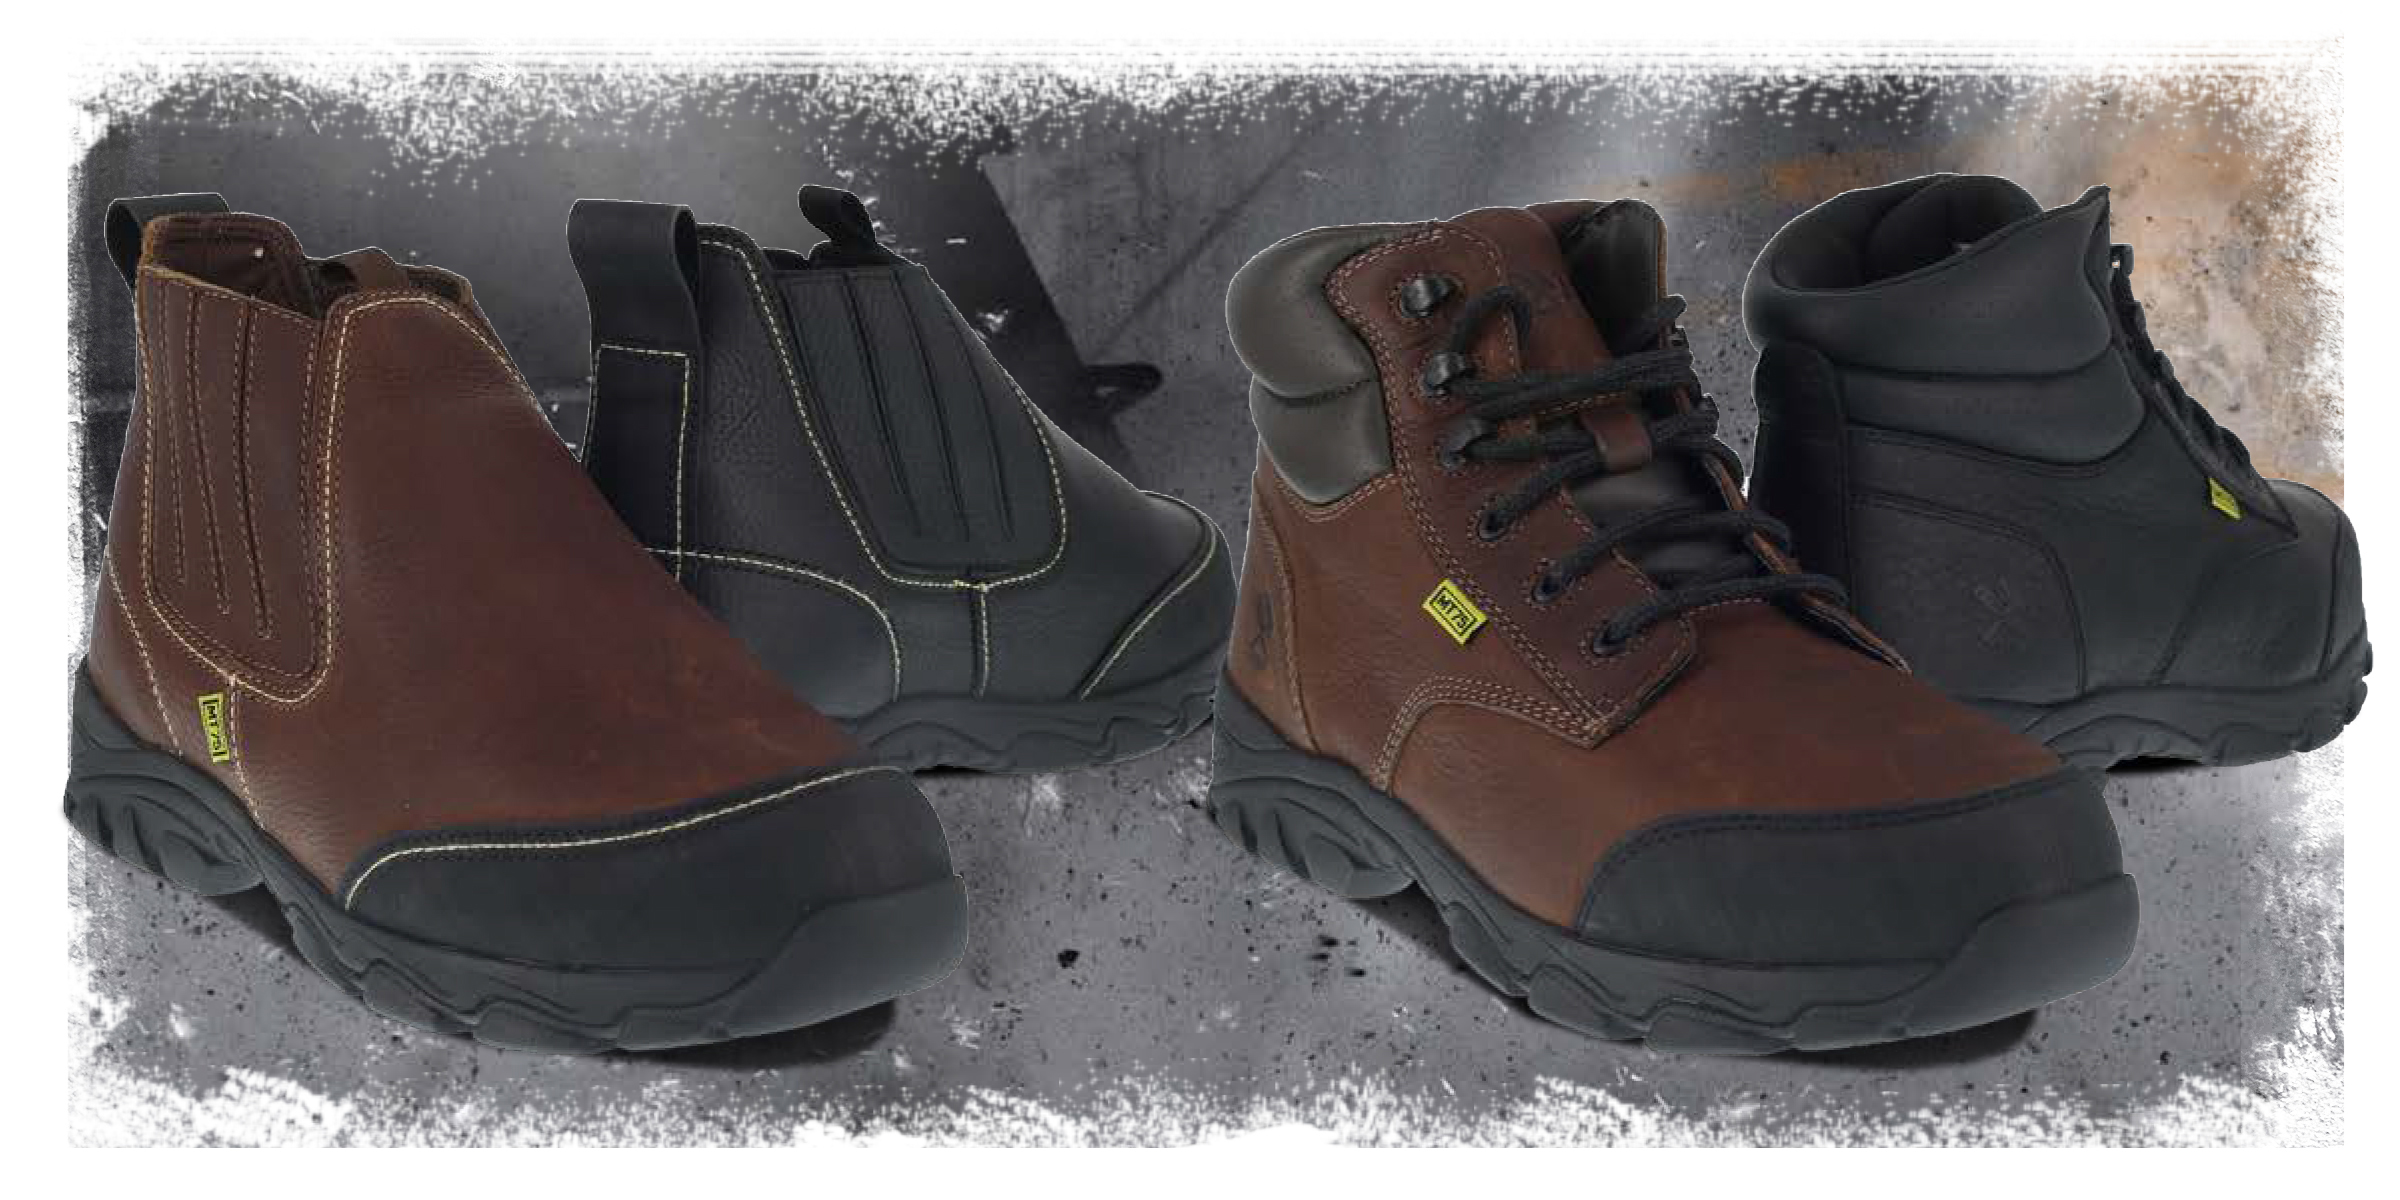 Galvanizer(TM) from Iron Age Footwear's "Old School Tough" line